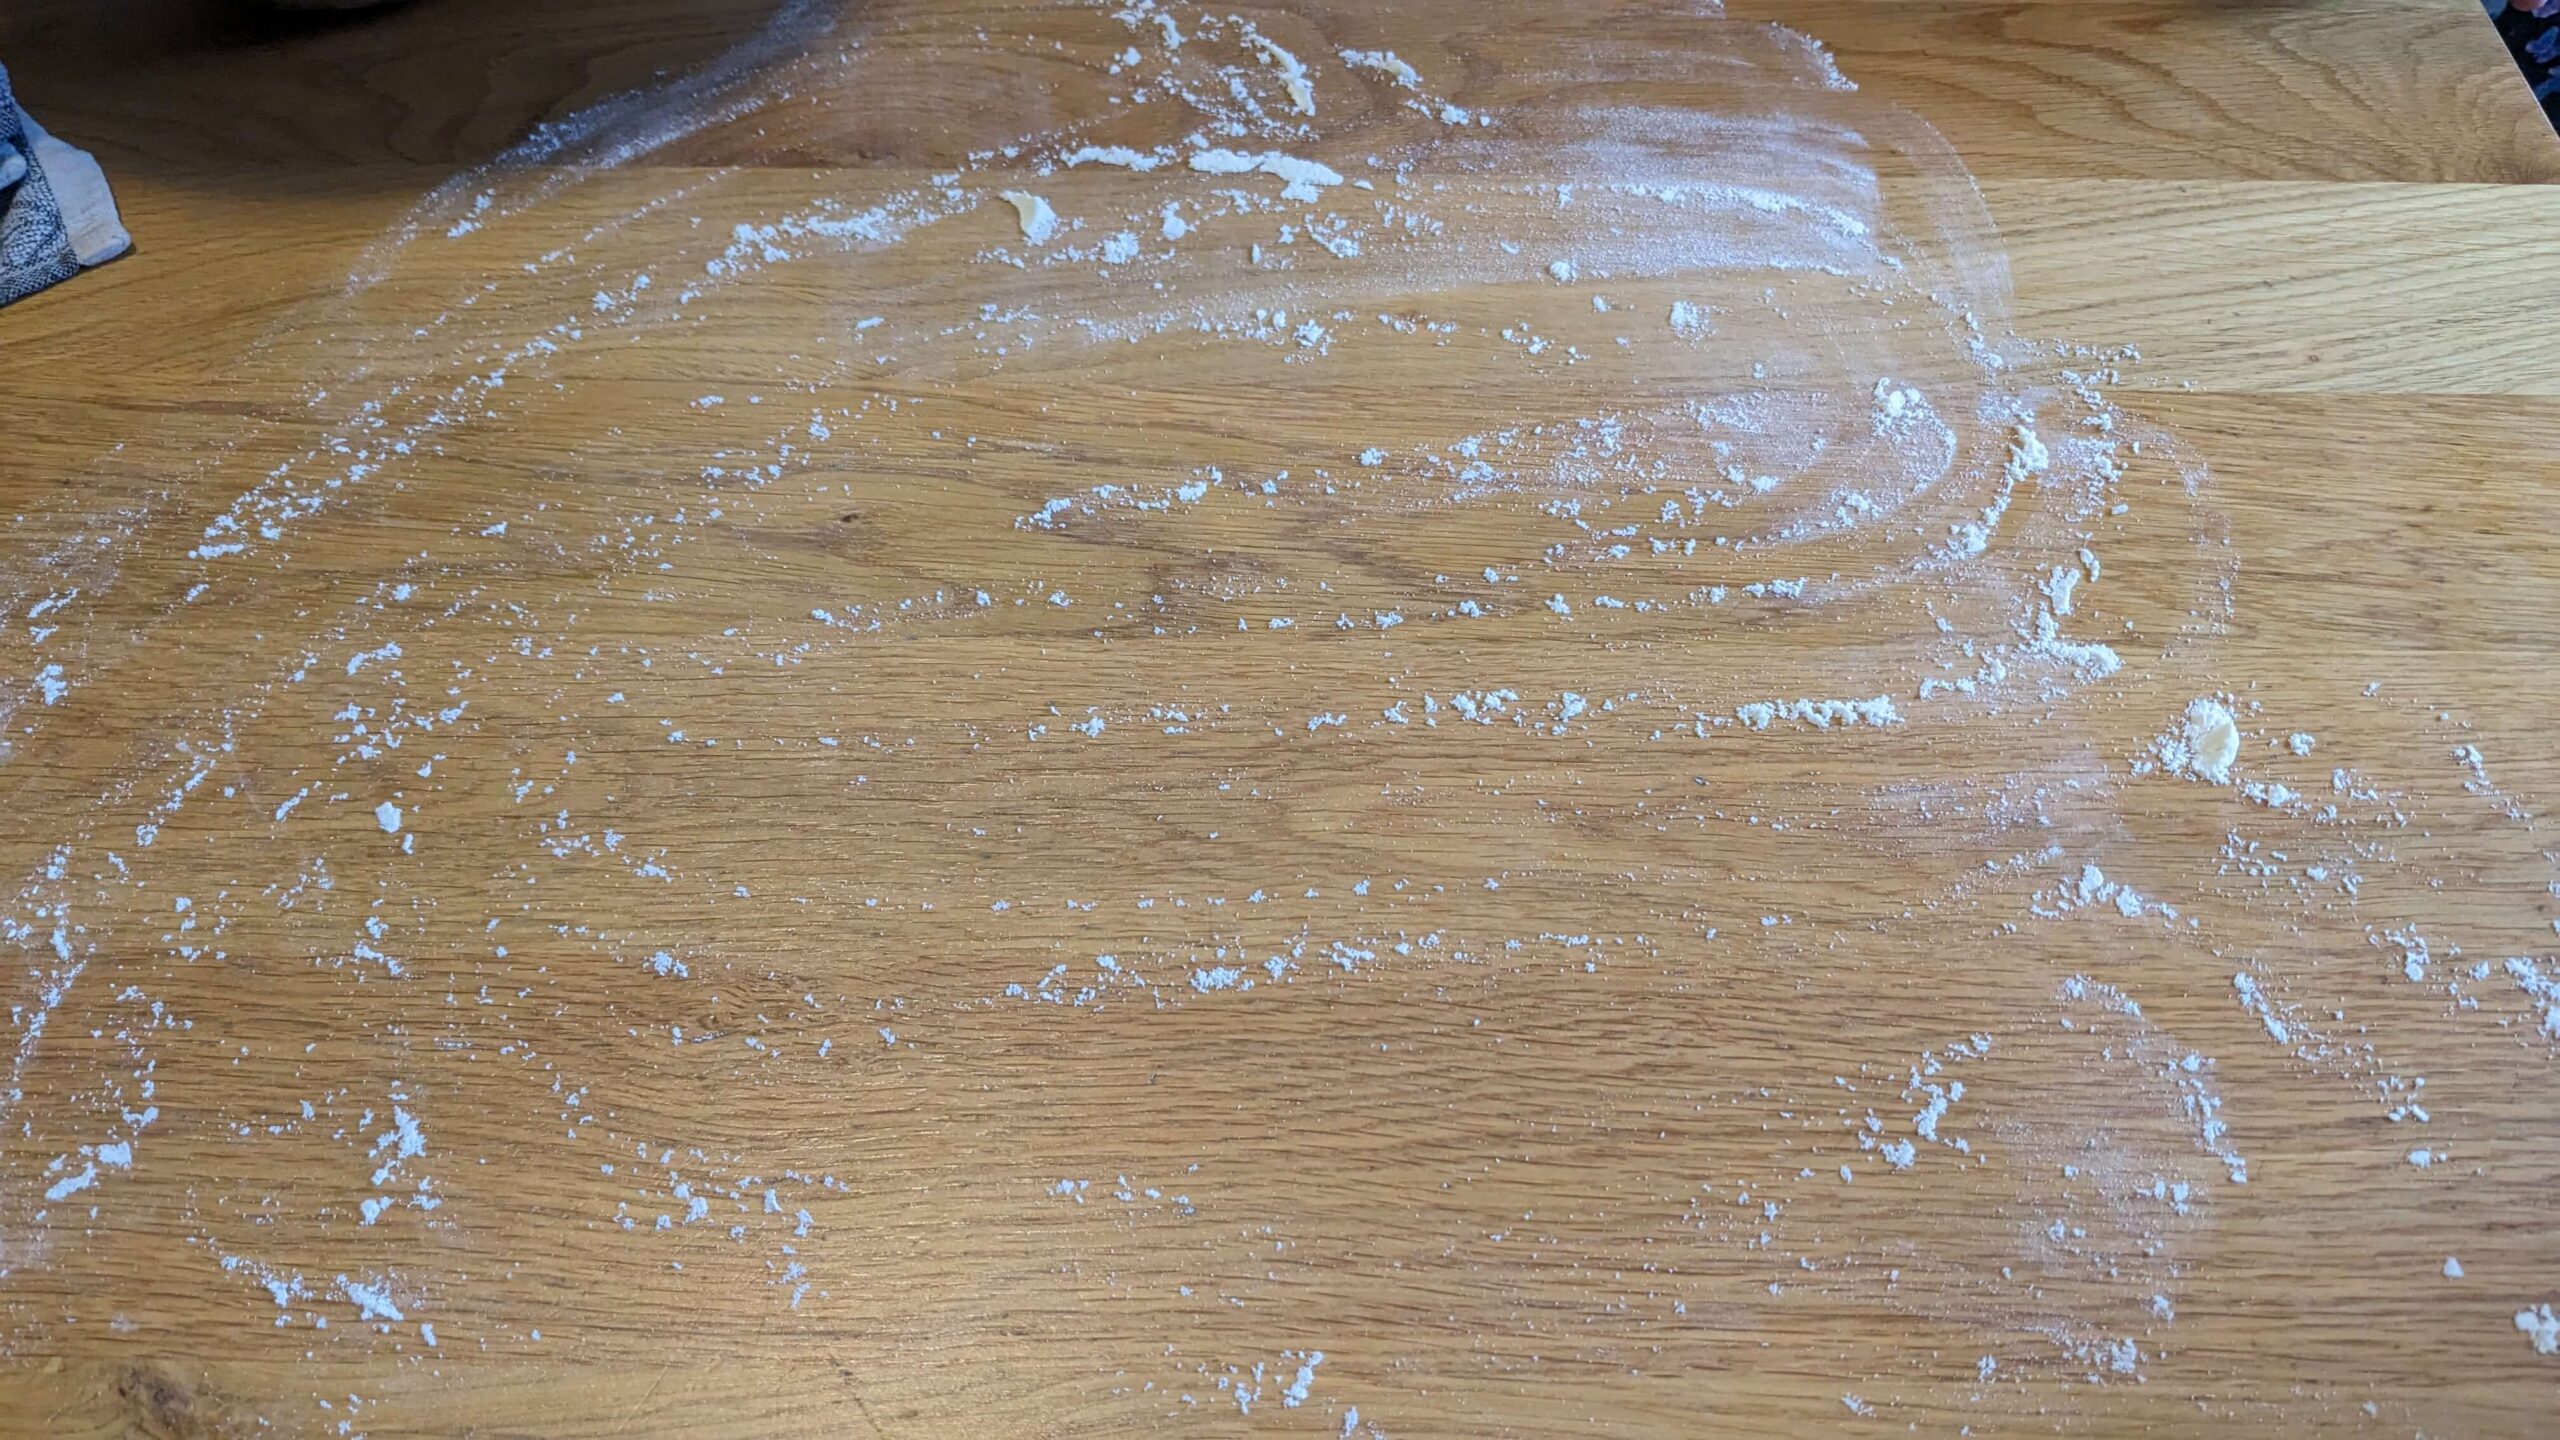 flour lightly dusted on a wooden surface